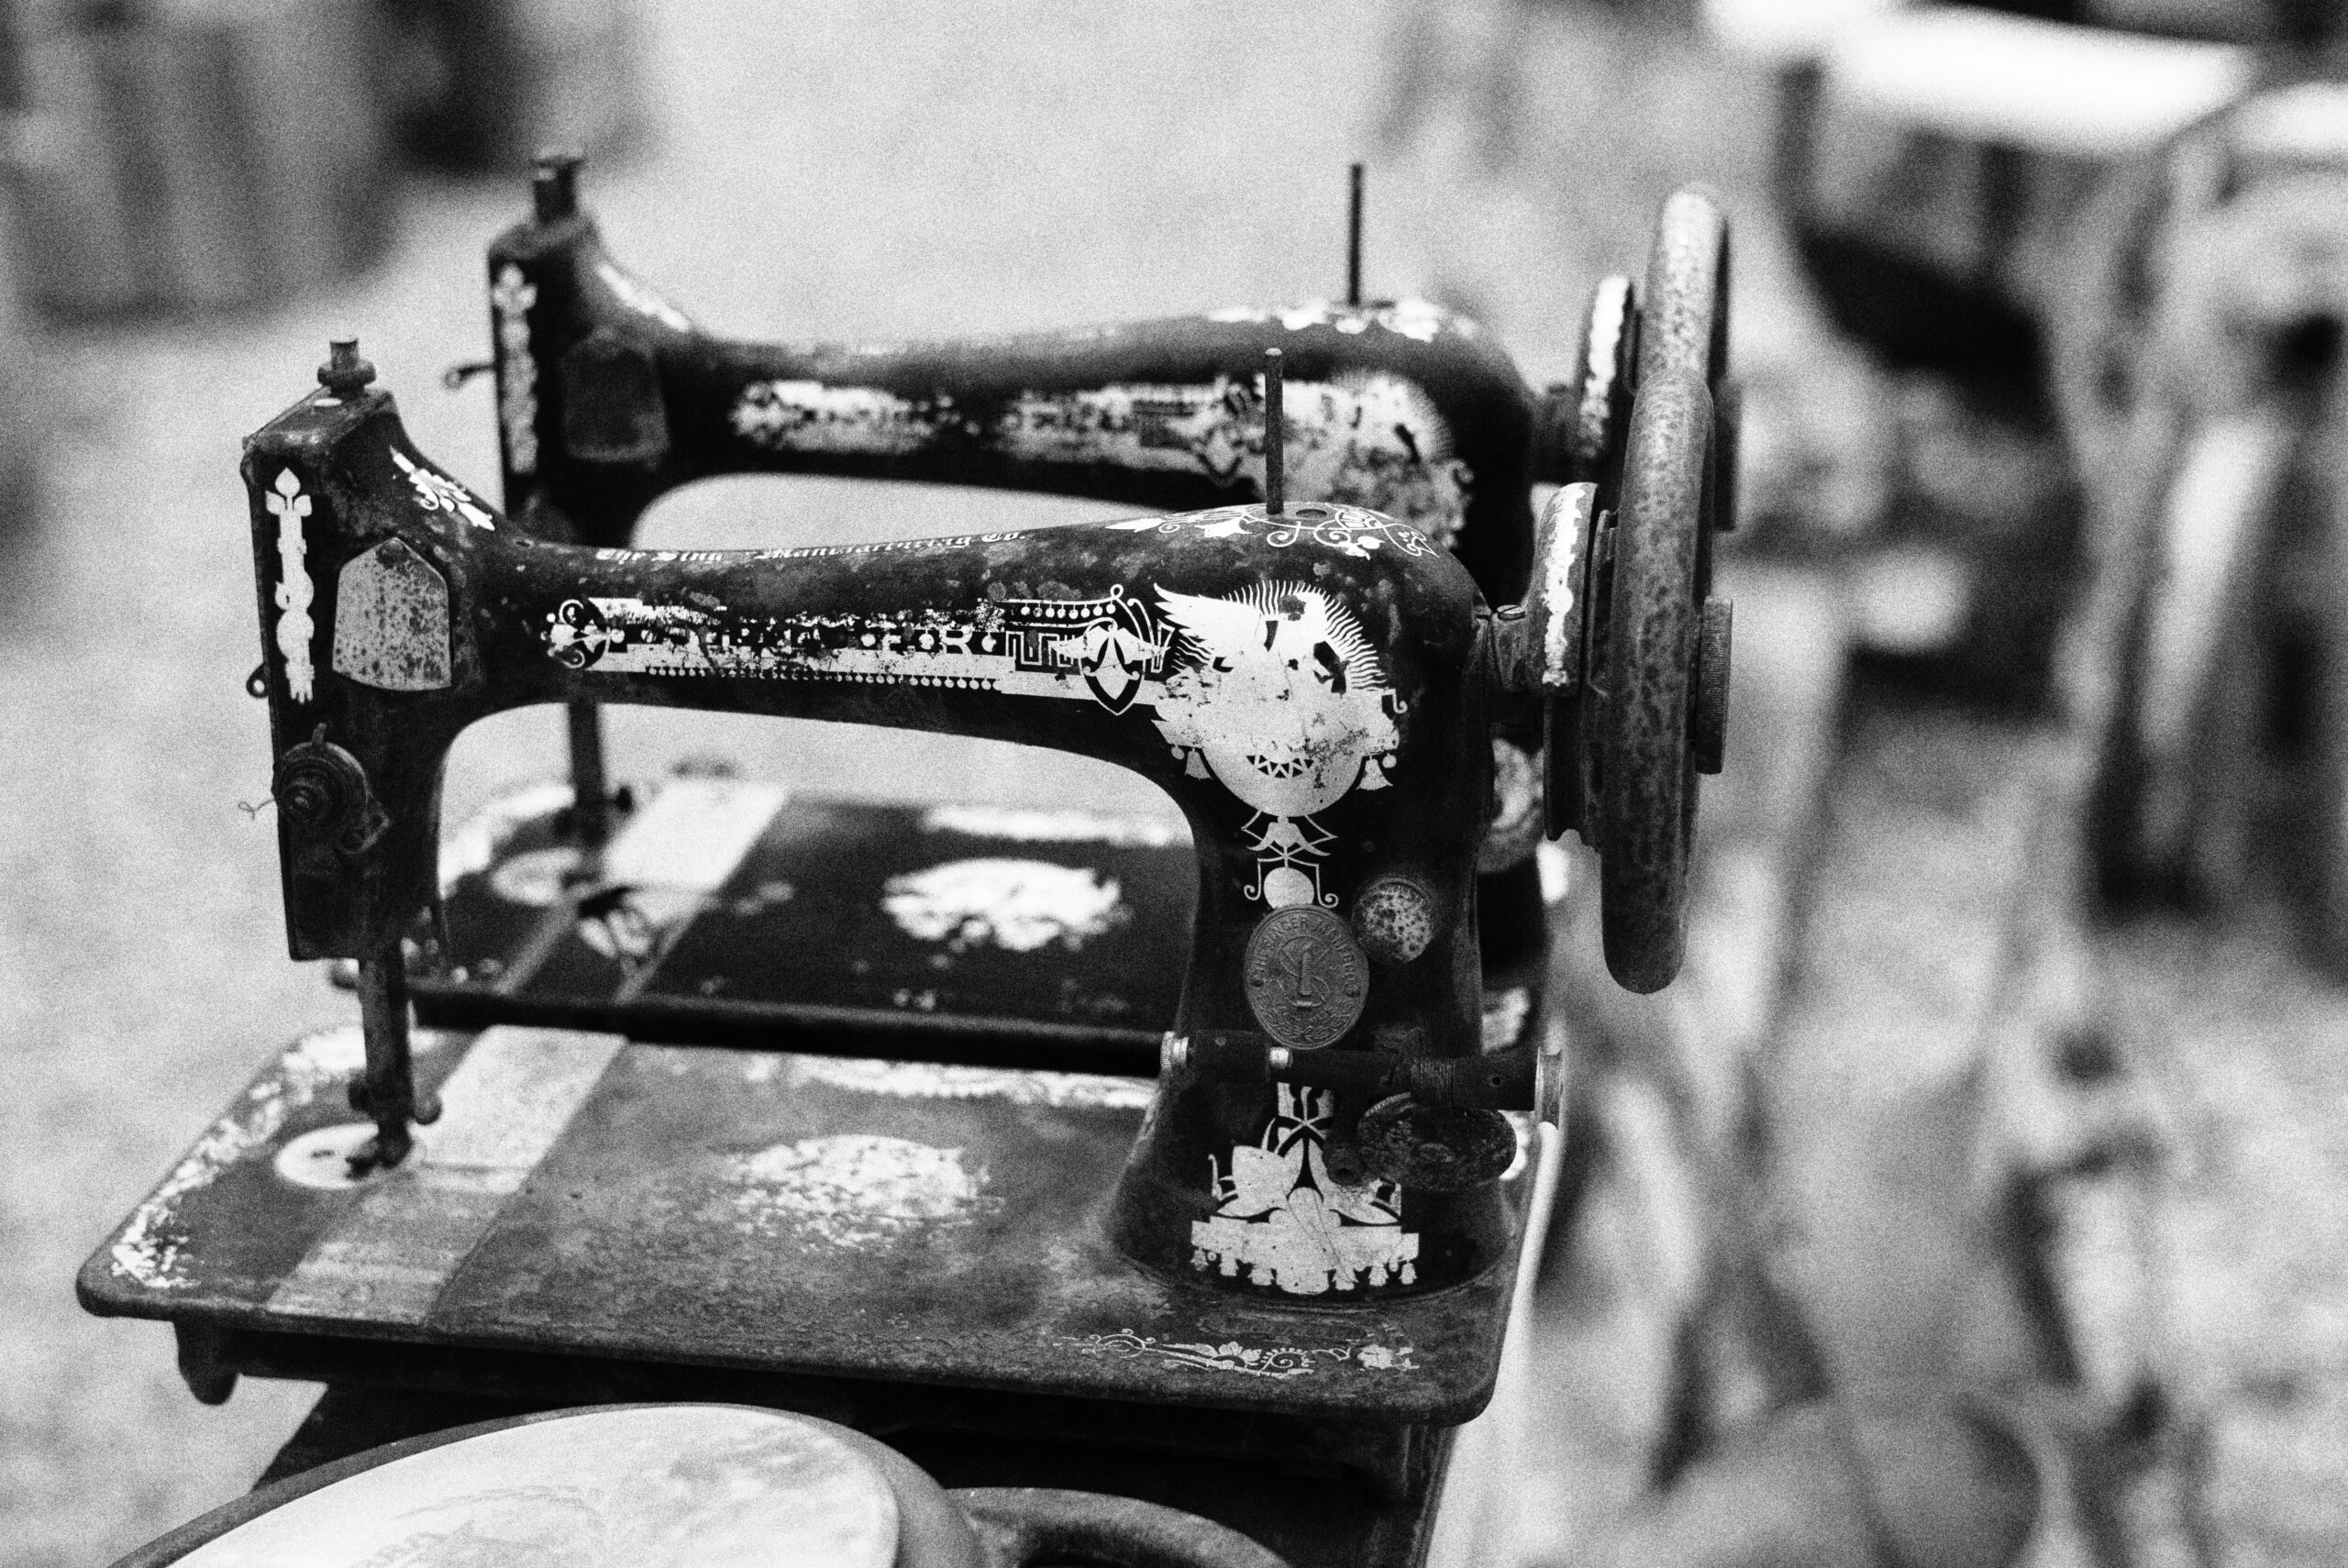 Grayscale photo of two sewing machine